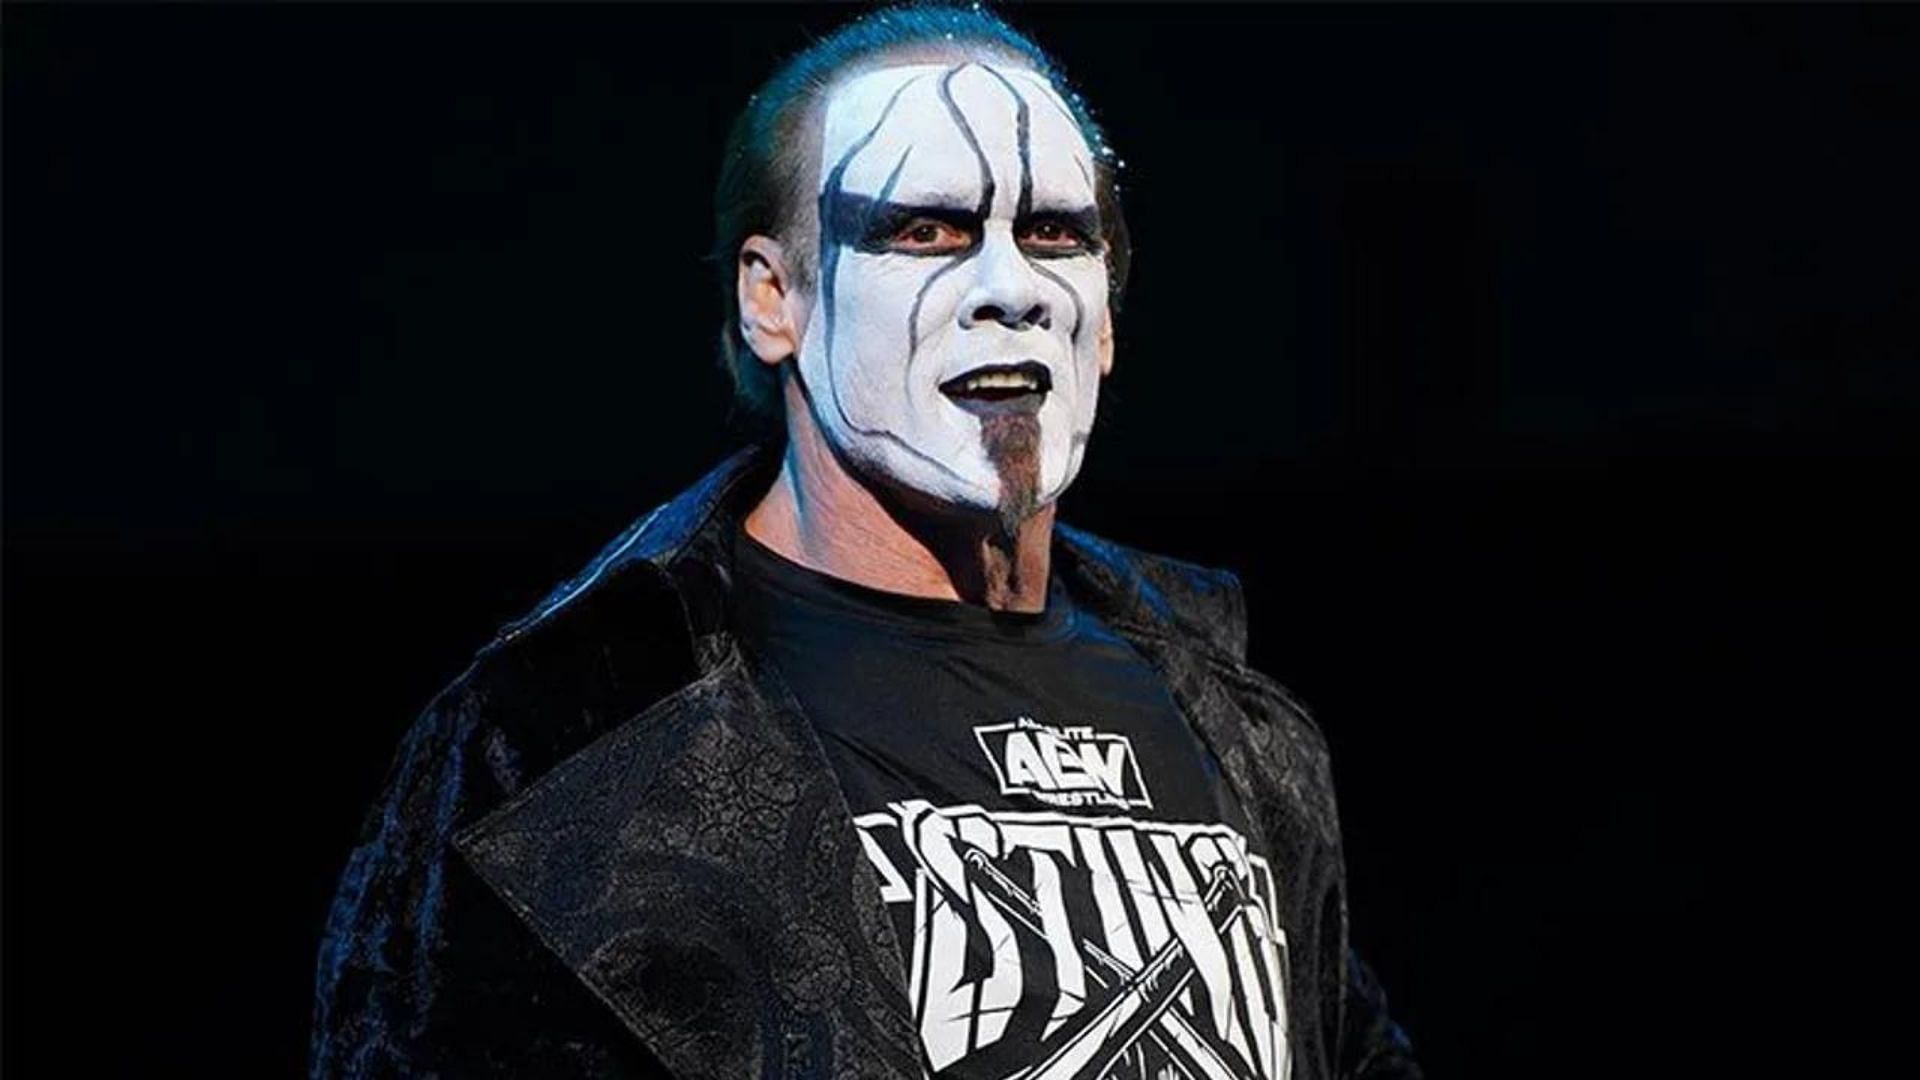 Sting is a WWE Hall of Famer currently with AEW